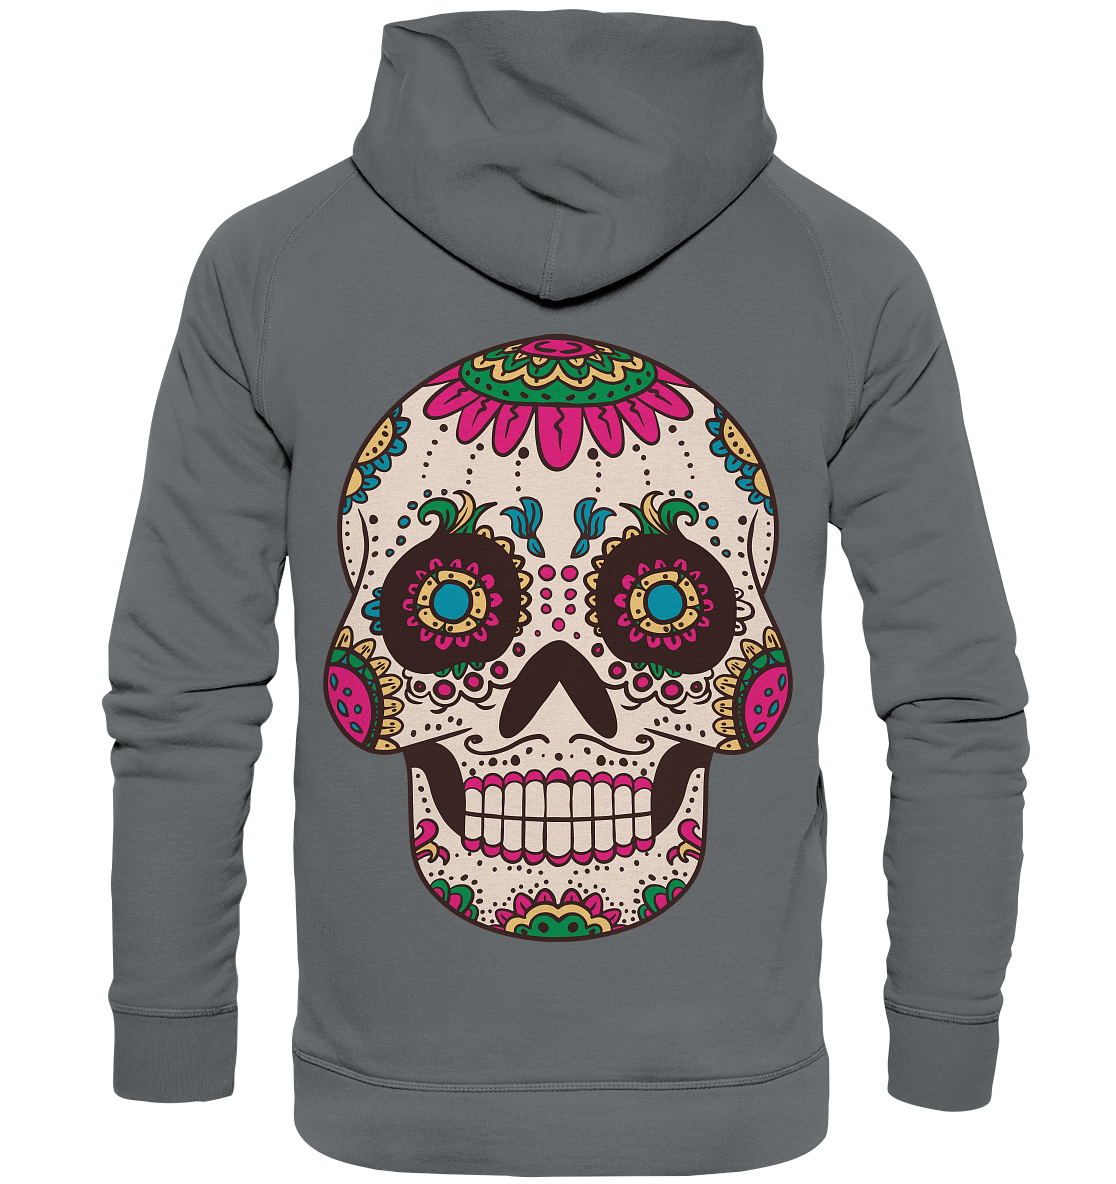 Skull Mouthcover Totenschädel Totenkopf  - Basic Unisex Hoodie